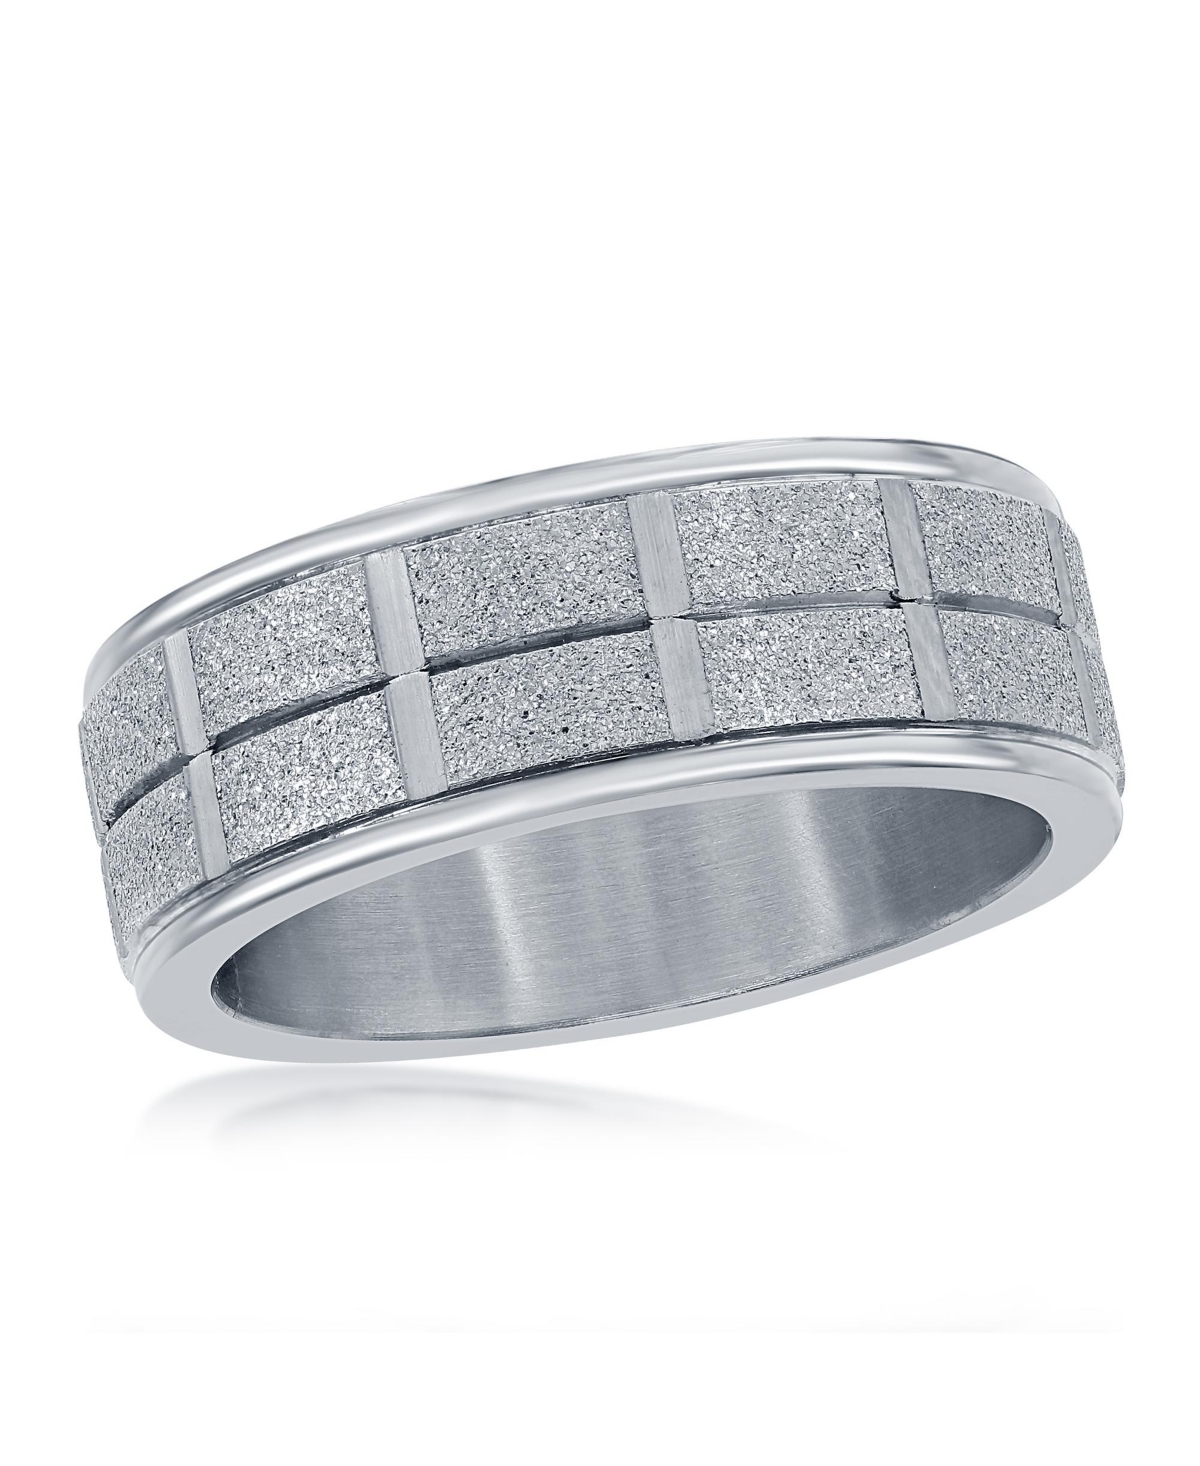 Stainless Steel Sand Blasted Ring - Silver